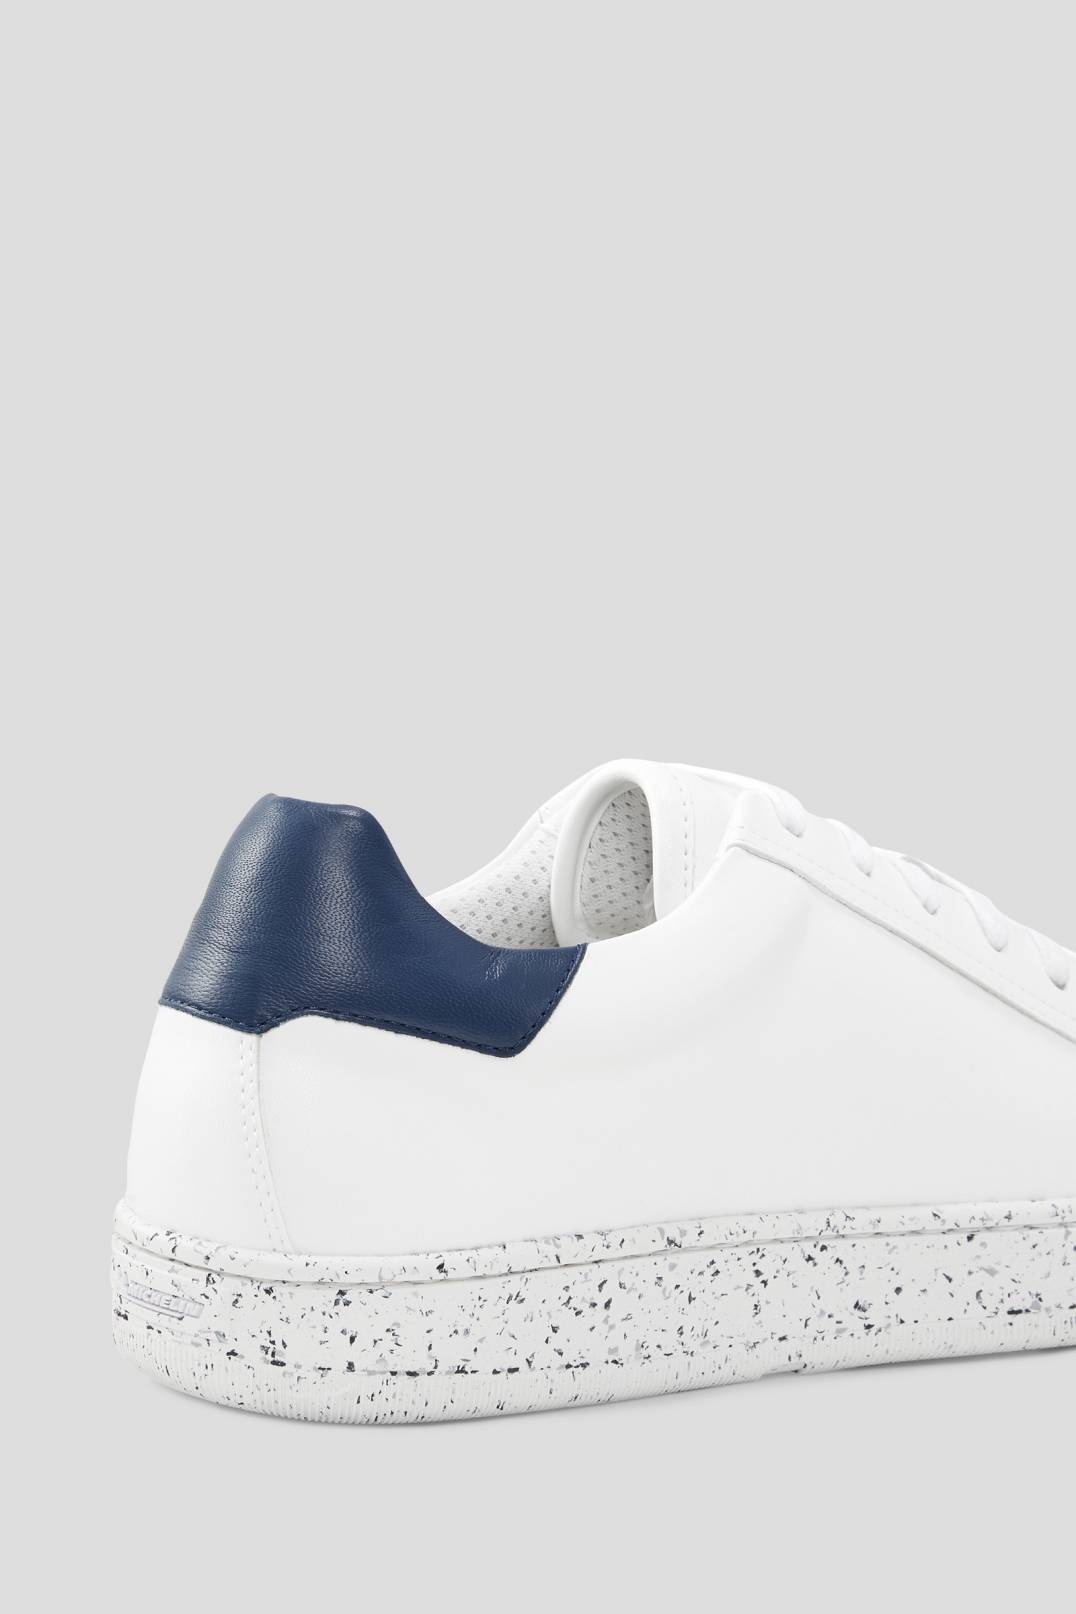 MALMÖ SUSTAINABLE SNEAKERS IN WHITE/NAVY BLUE - 7